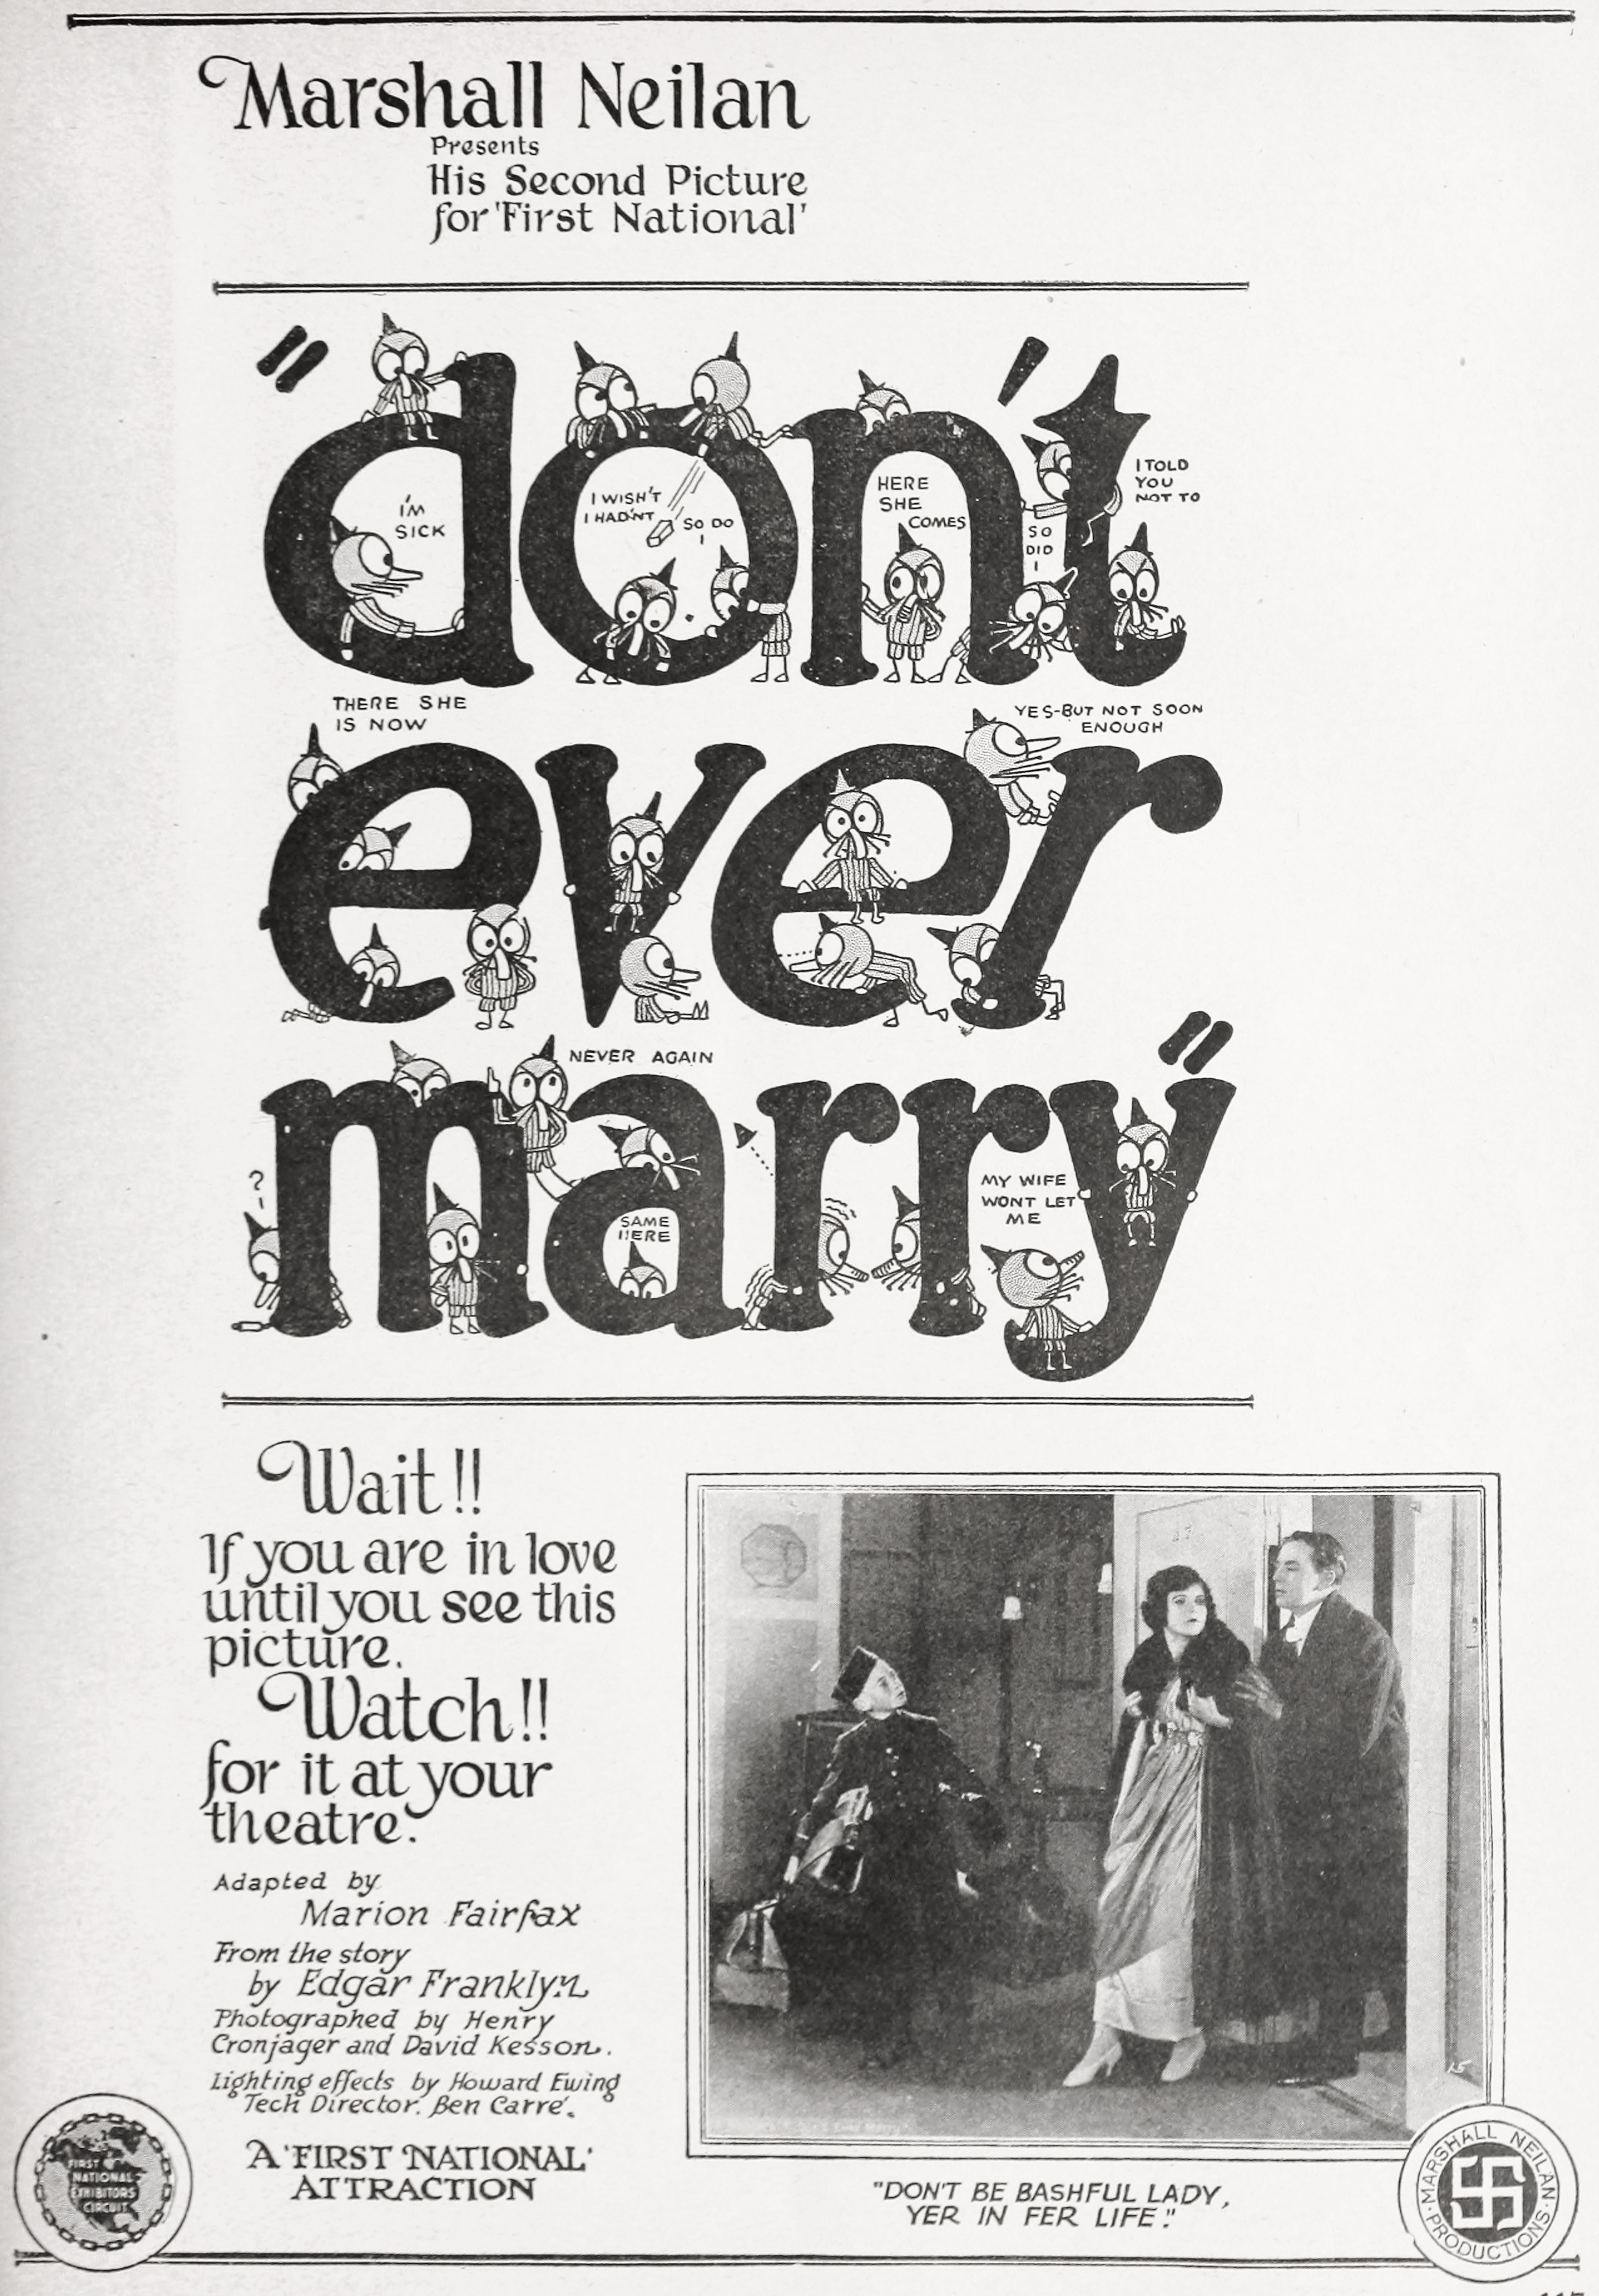 Don't Ever Marry